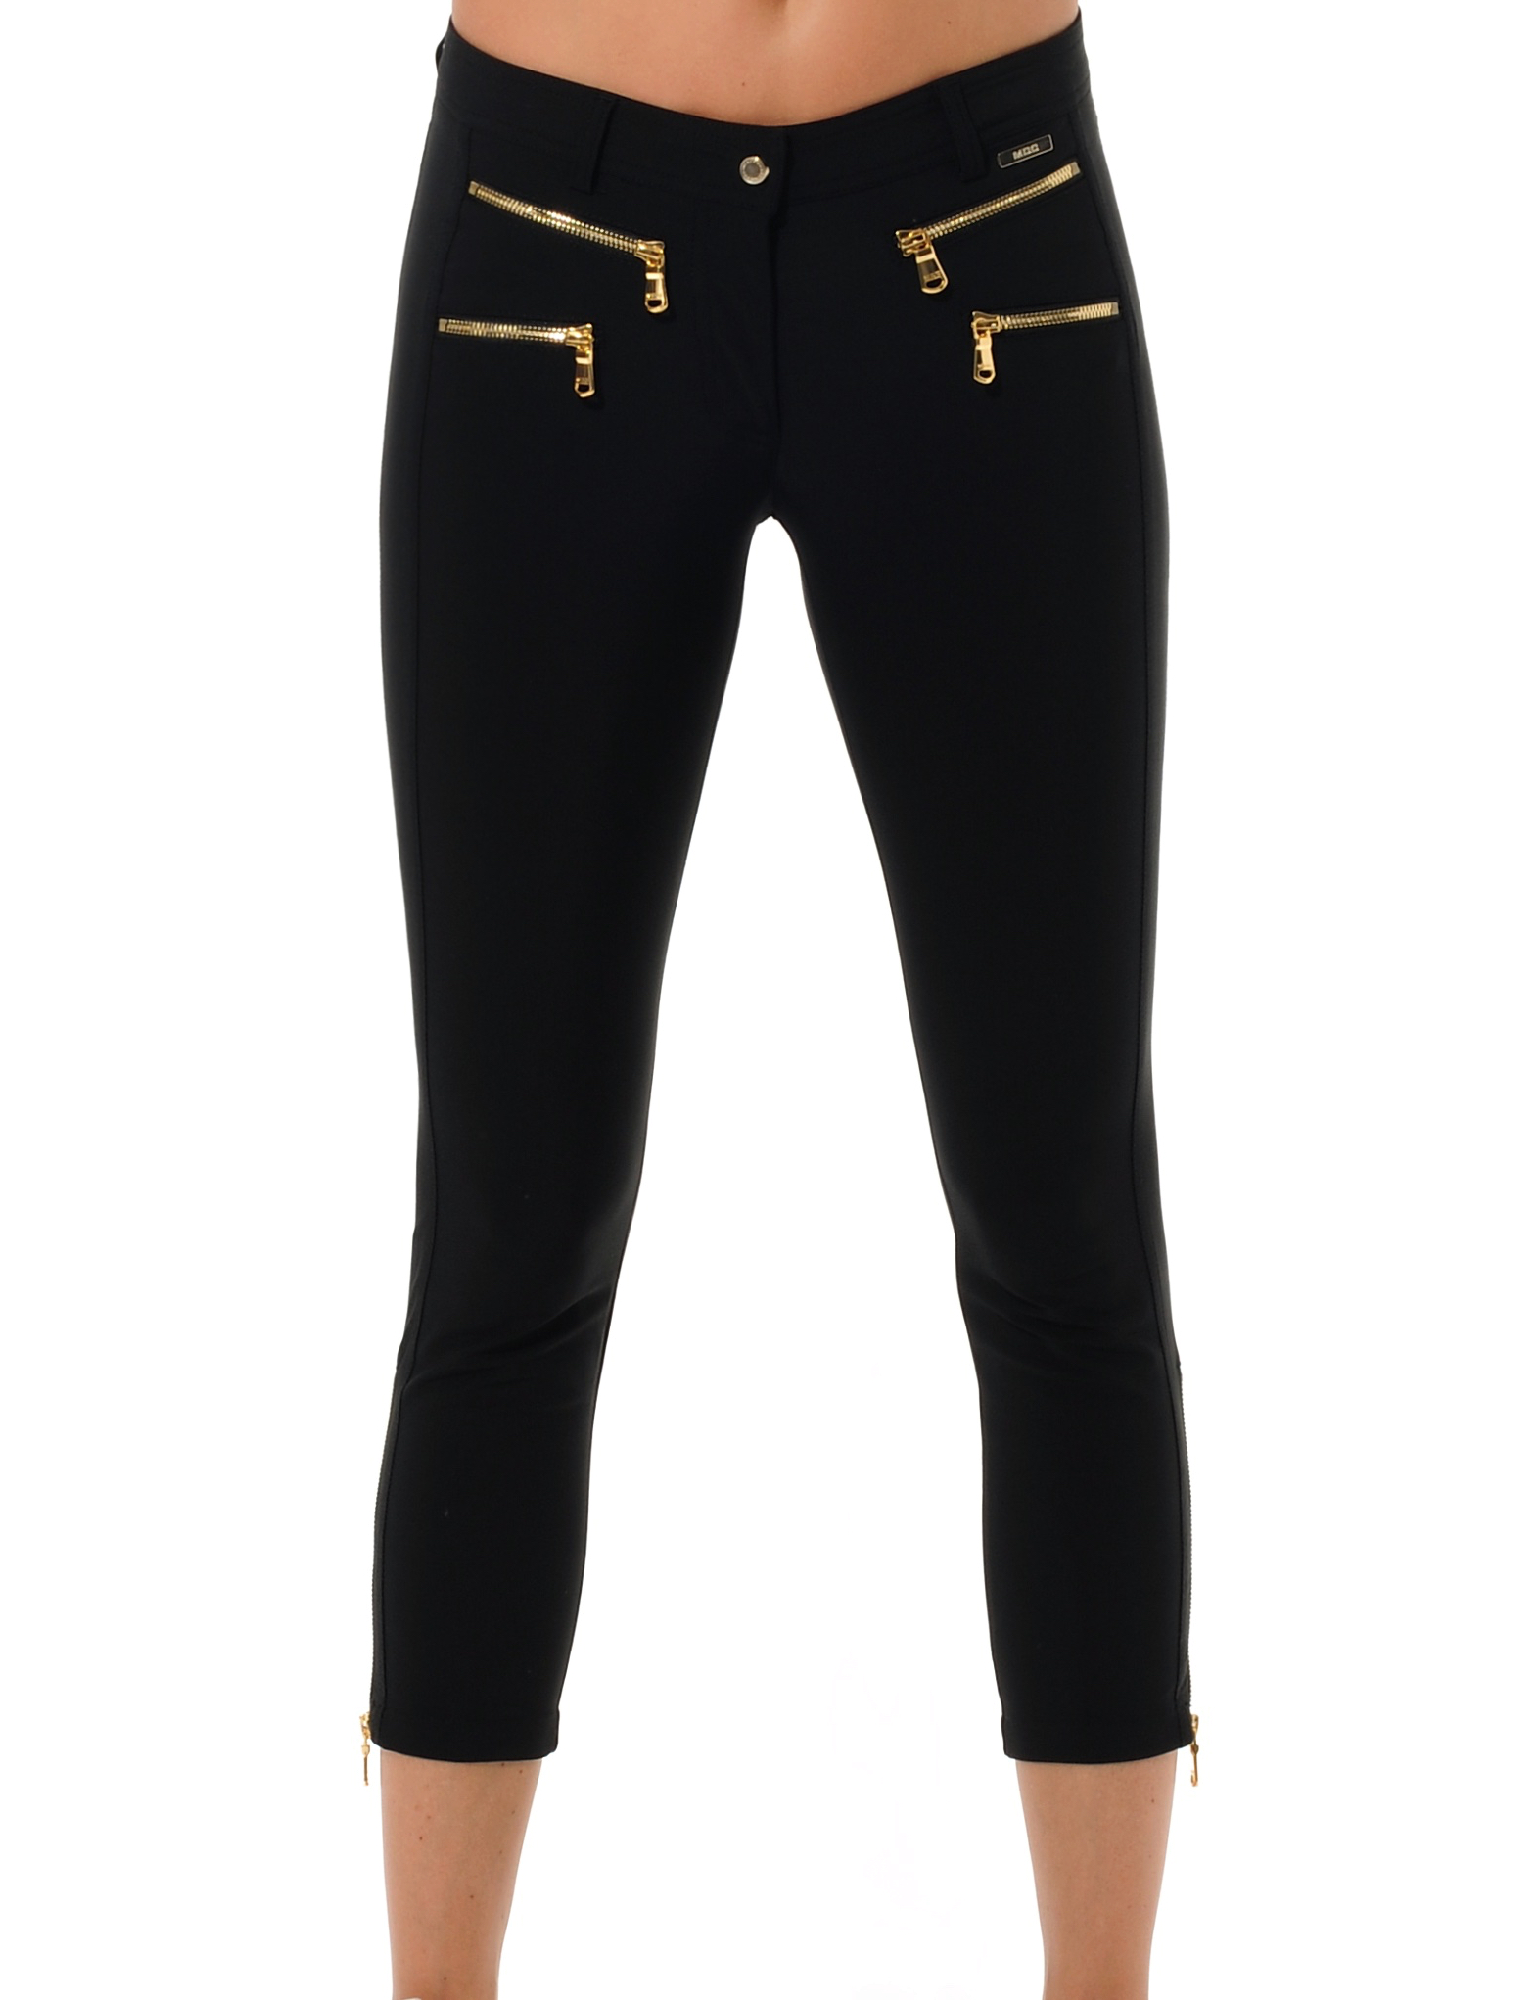 4way stretch shiny gold double zip cropped pants black 